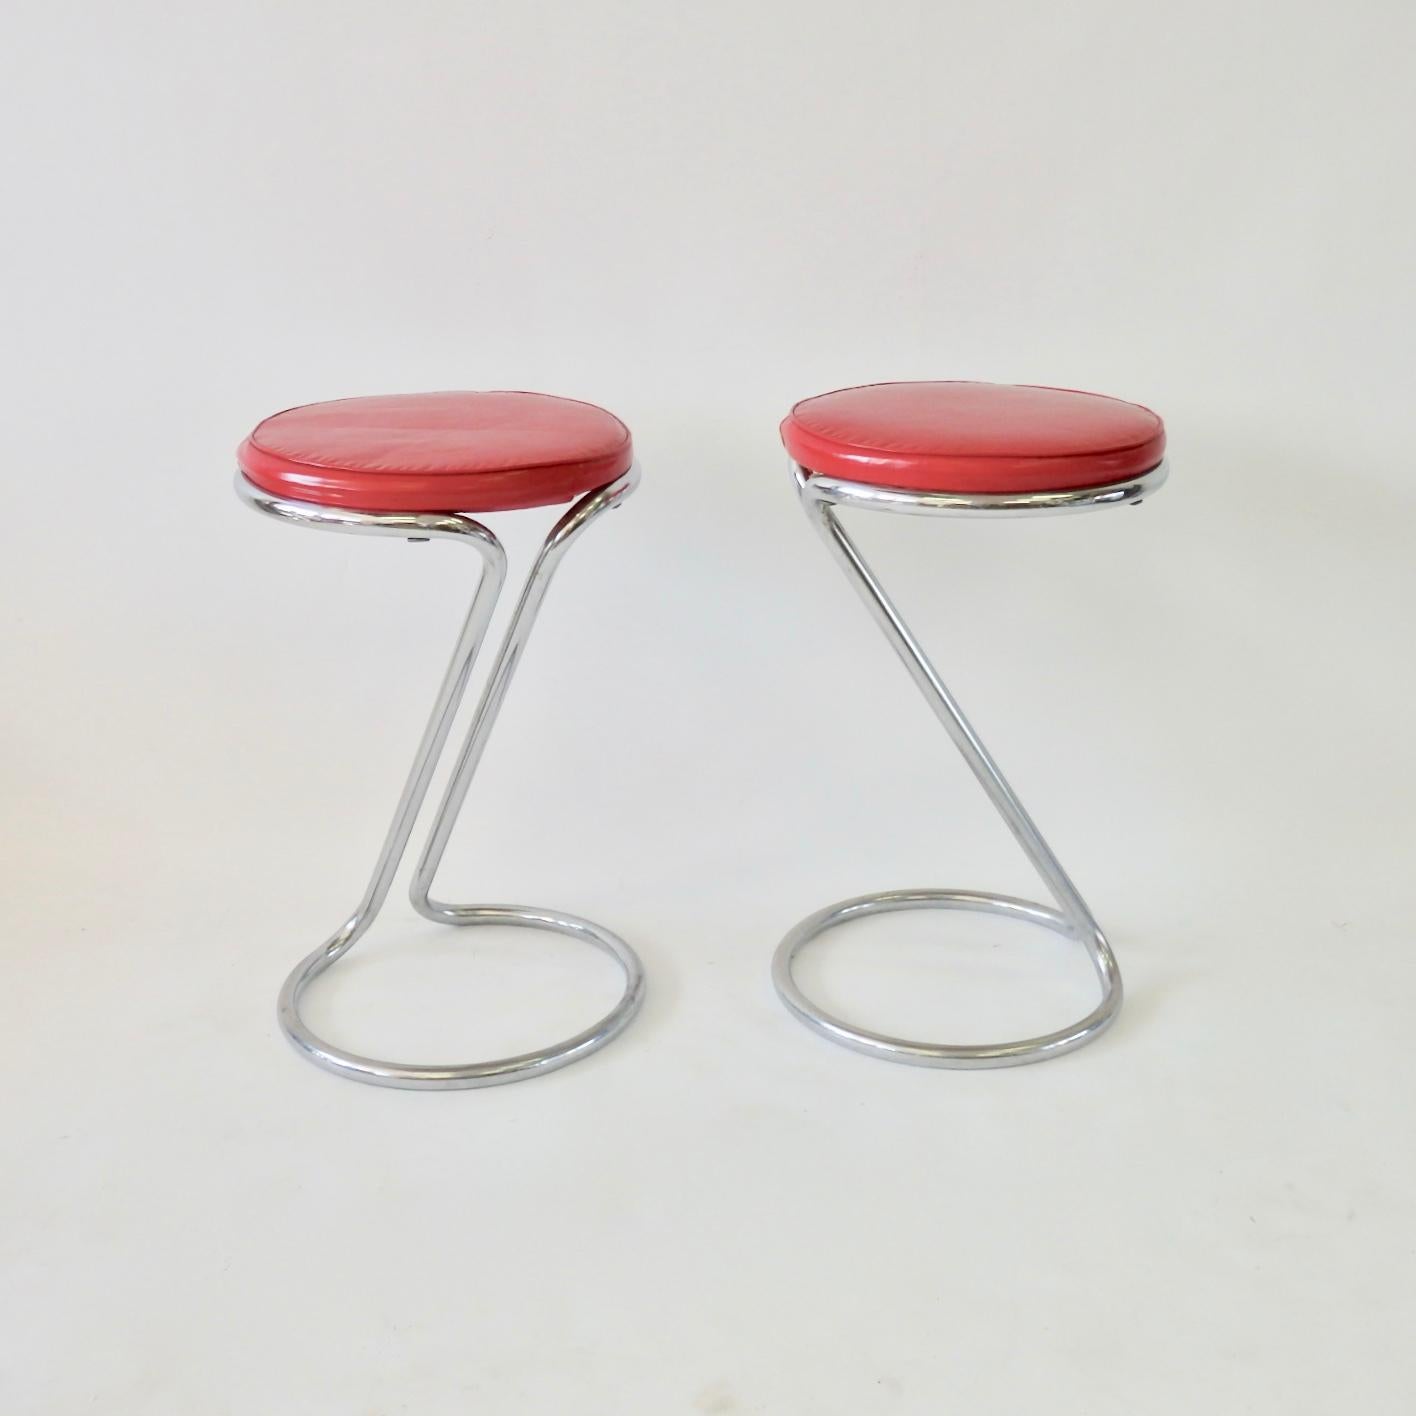 20th Century Pair of Art Deco Moderne Gilbert Rohde for Troy Sunshade Chrome Z Stools